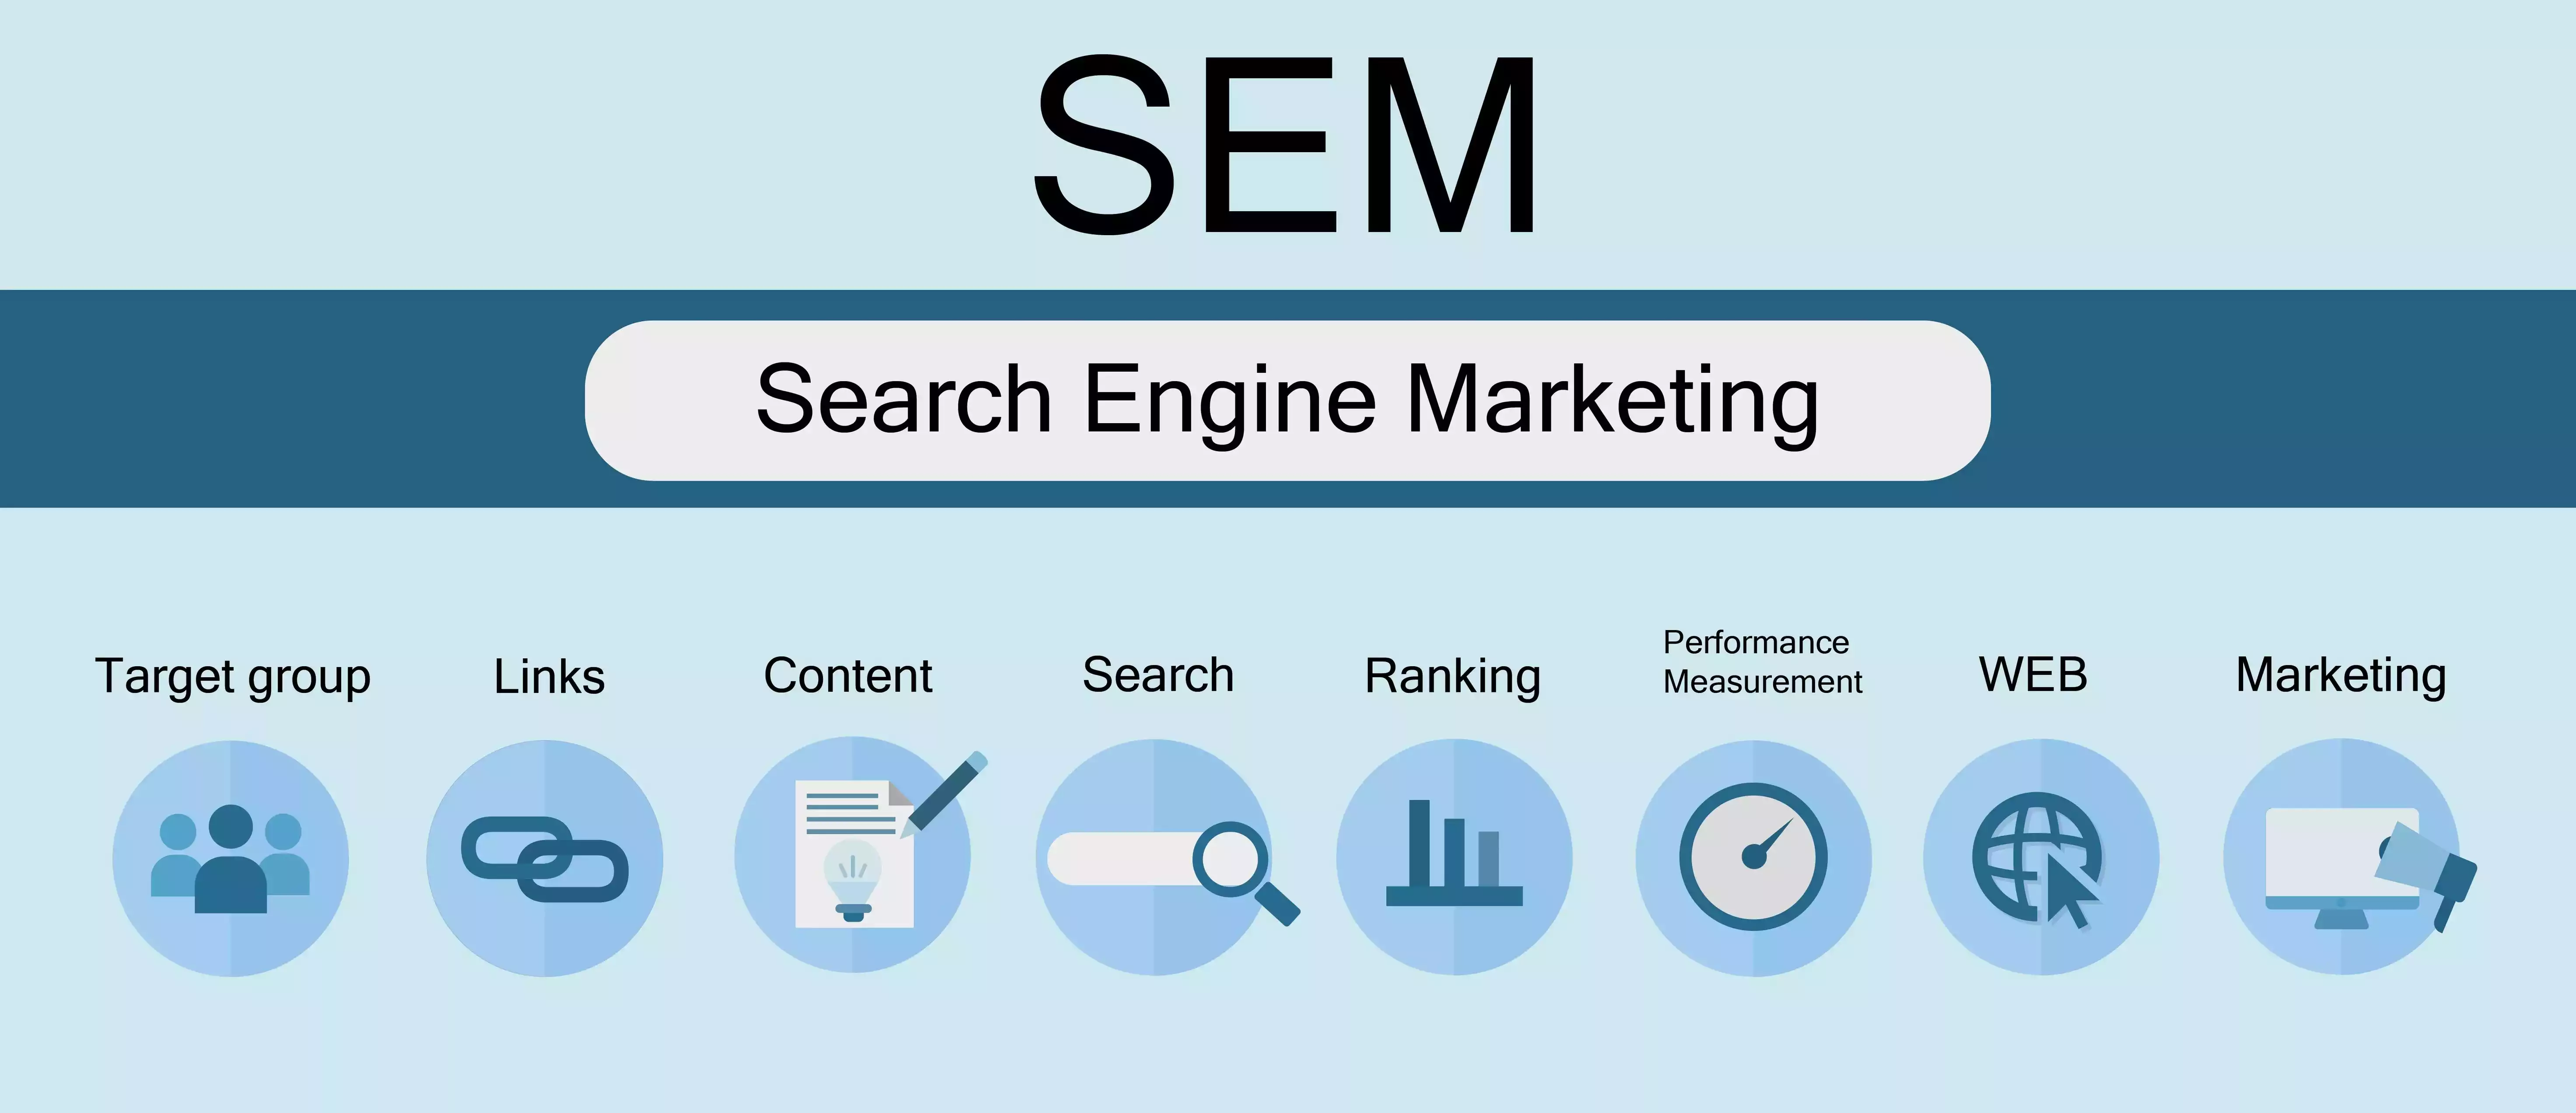 Search Engine Marketing Services & Solutions